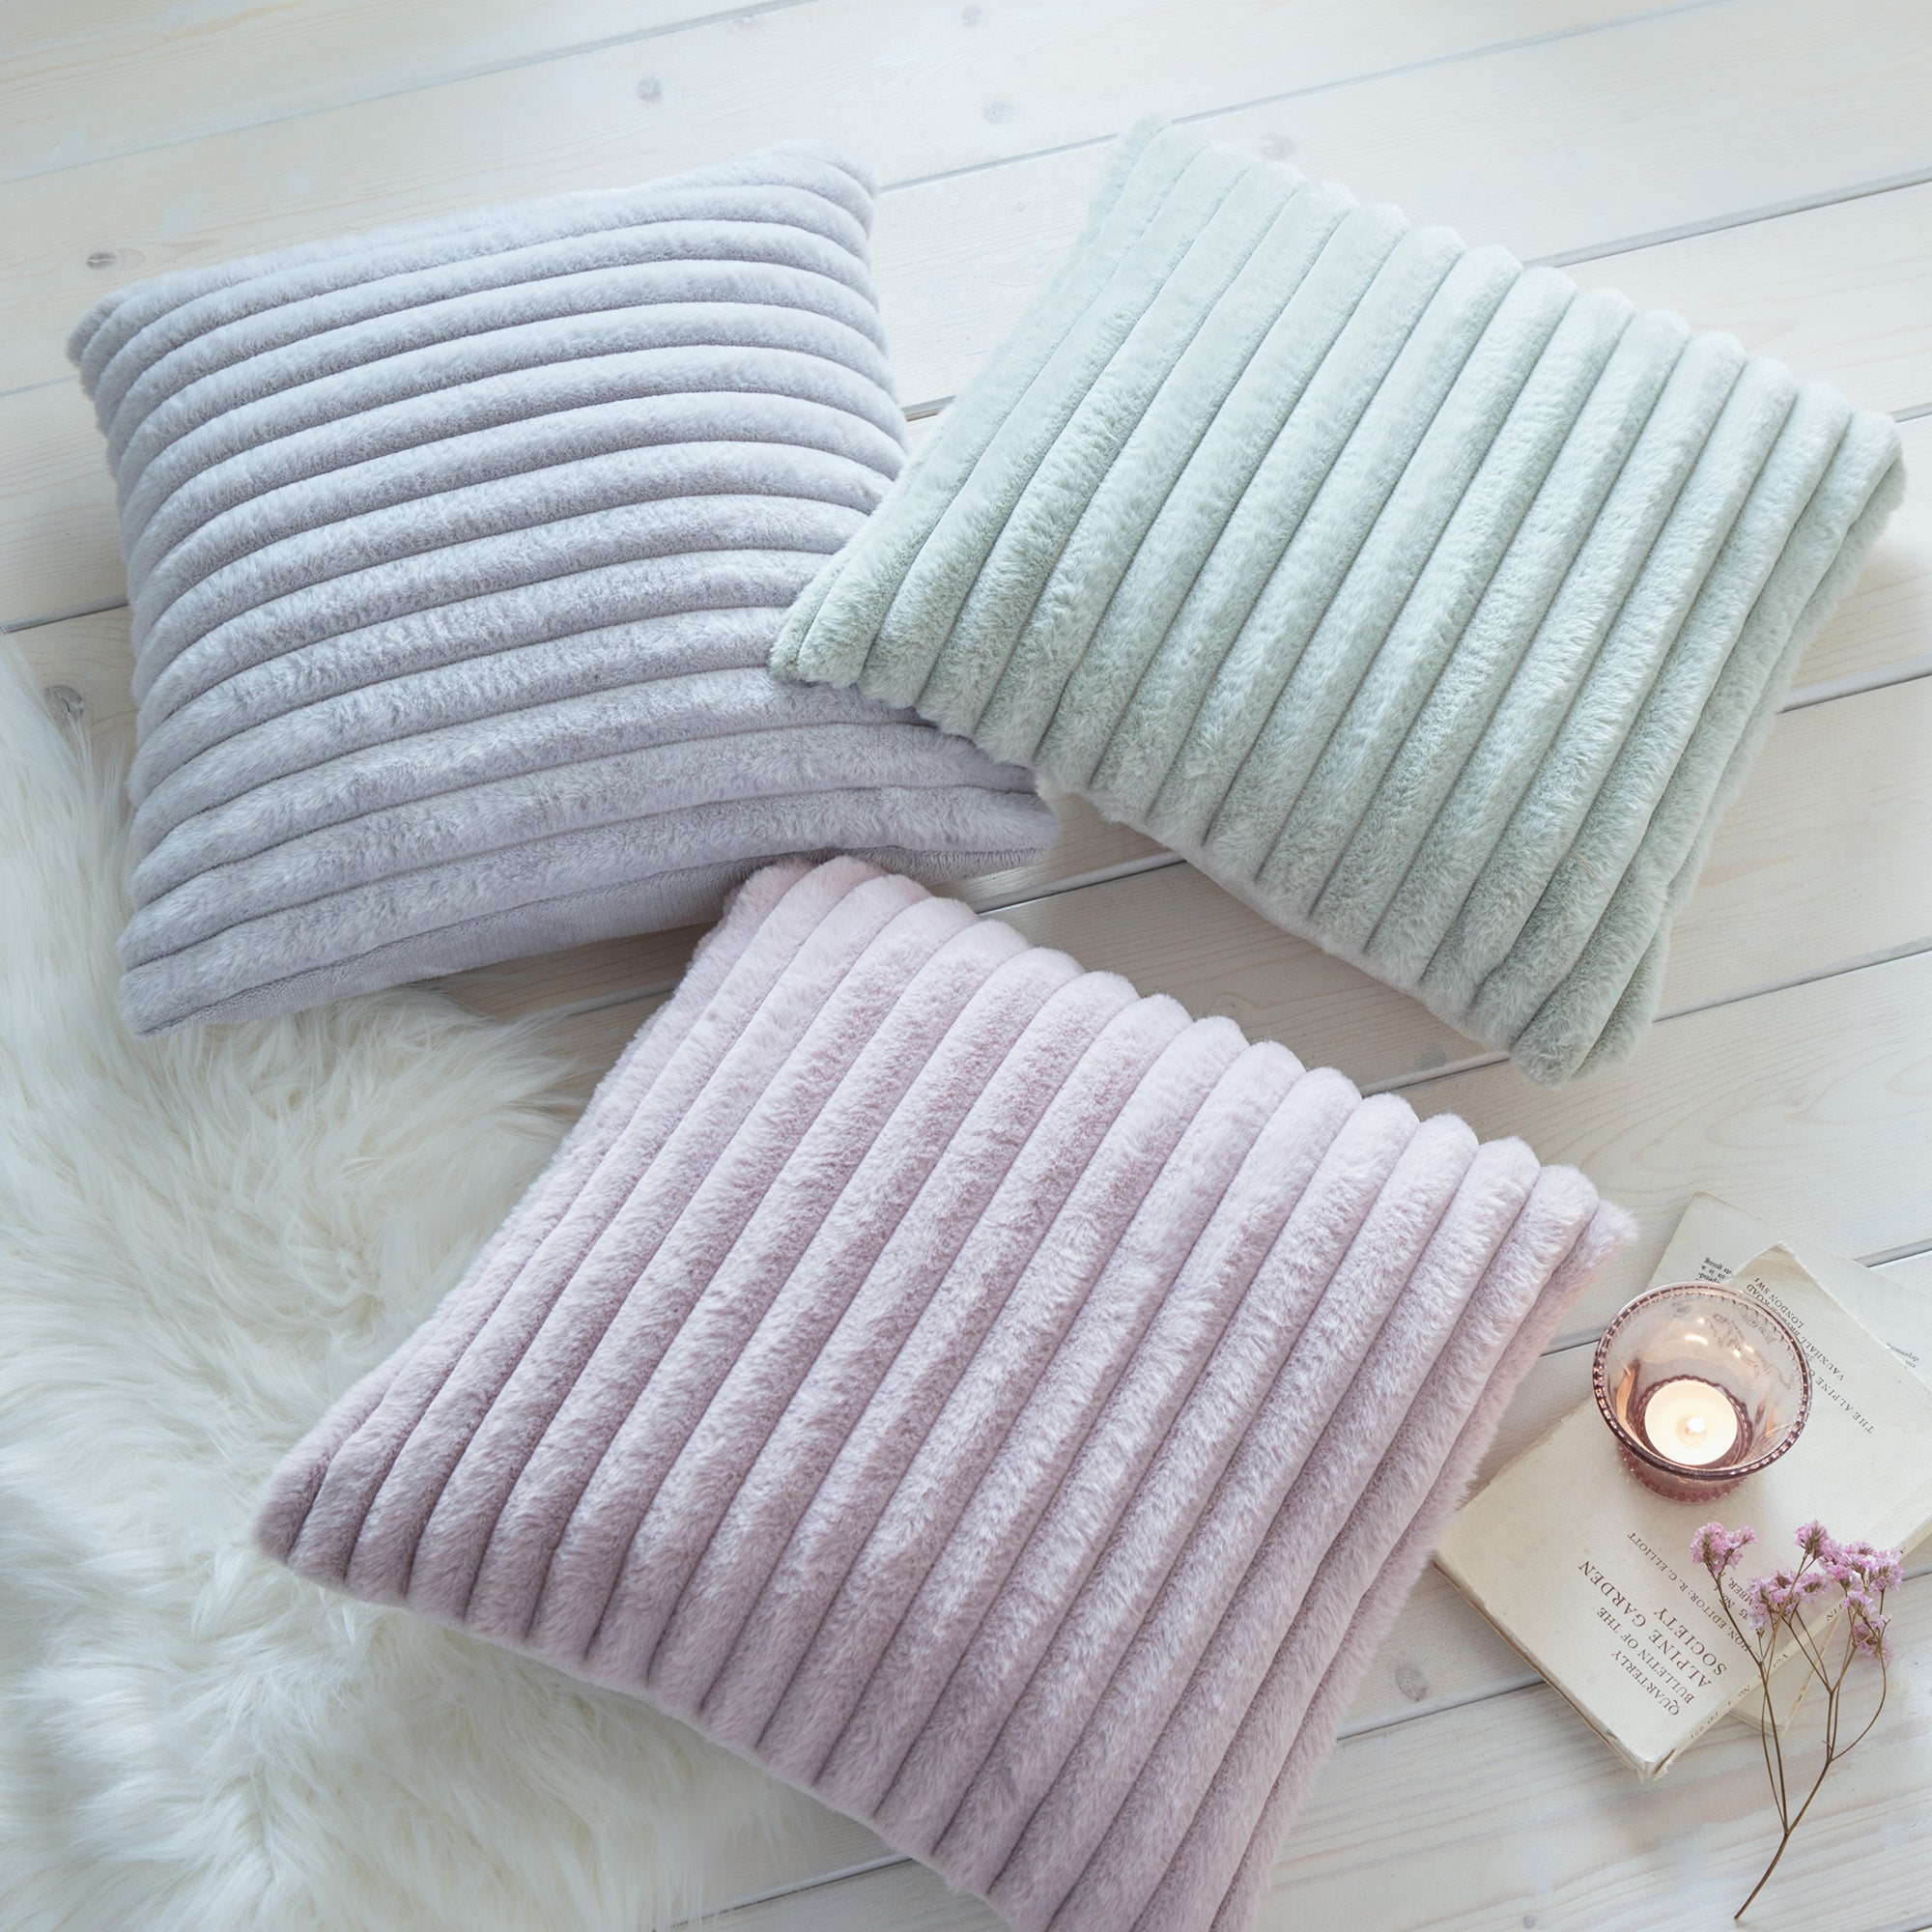 Cushion Cover Morritz by Appletree Hygge in Mauve